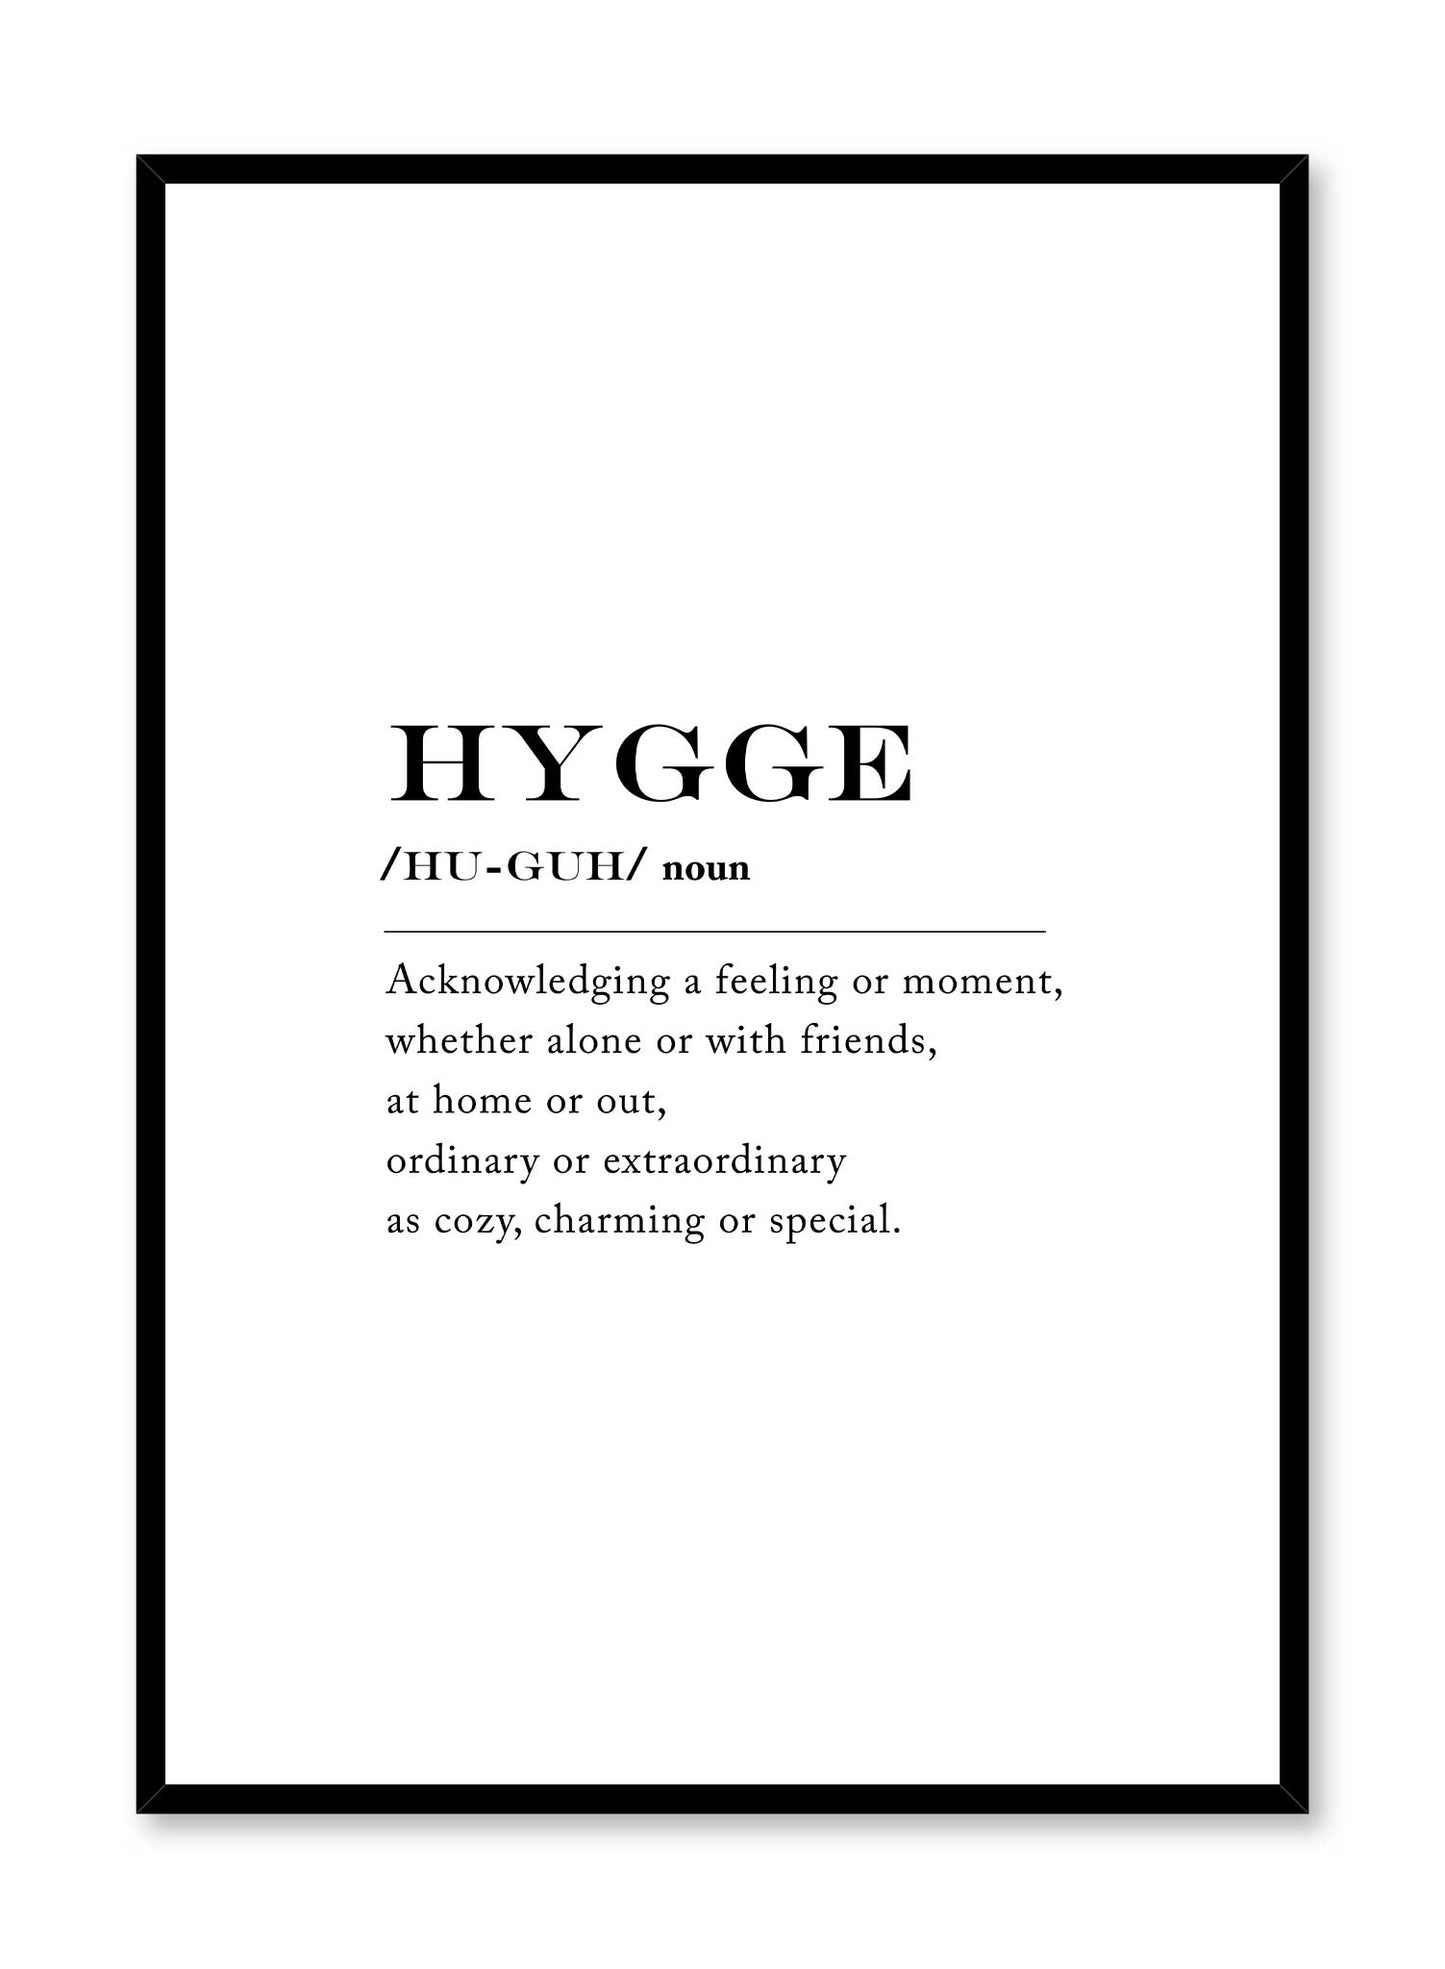 Hygge definition, Poster | Oppositewall.com